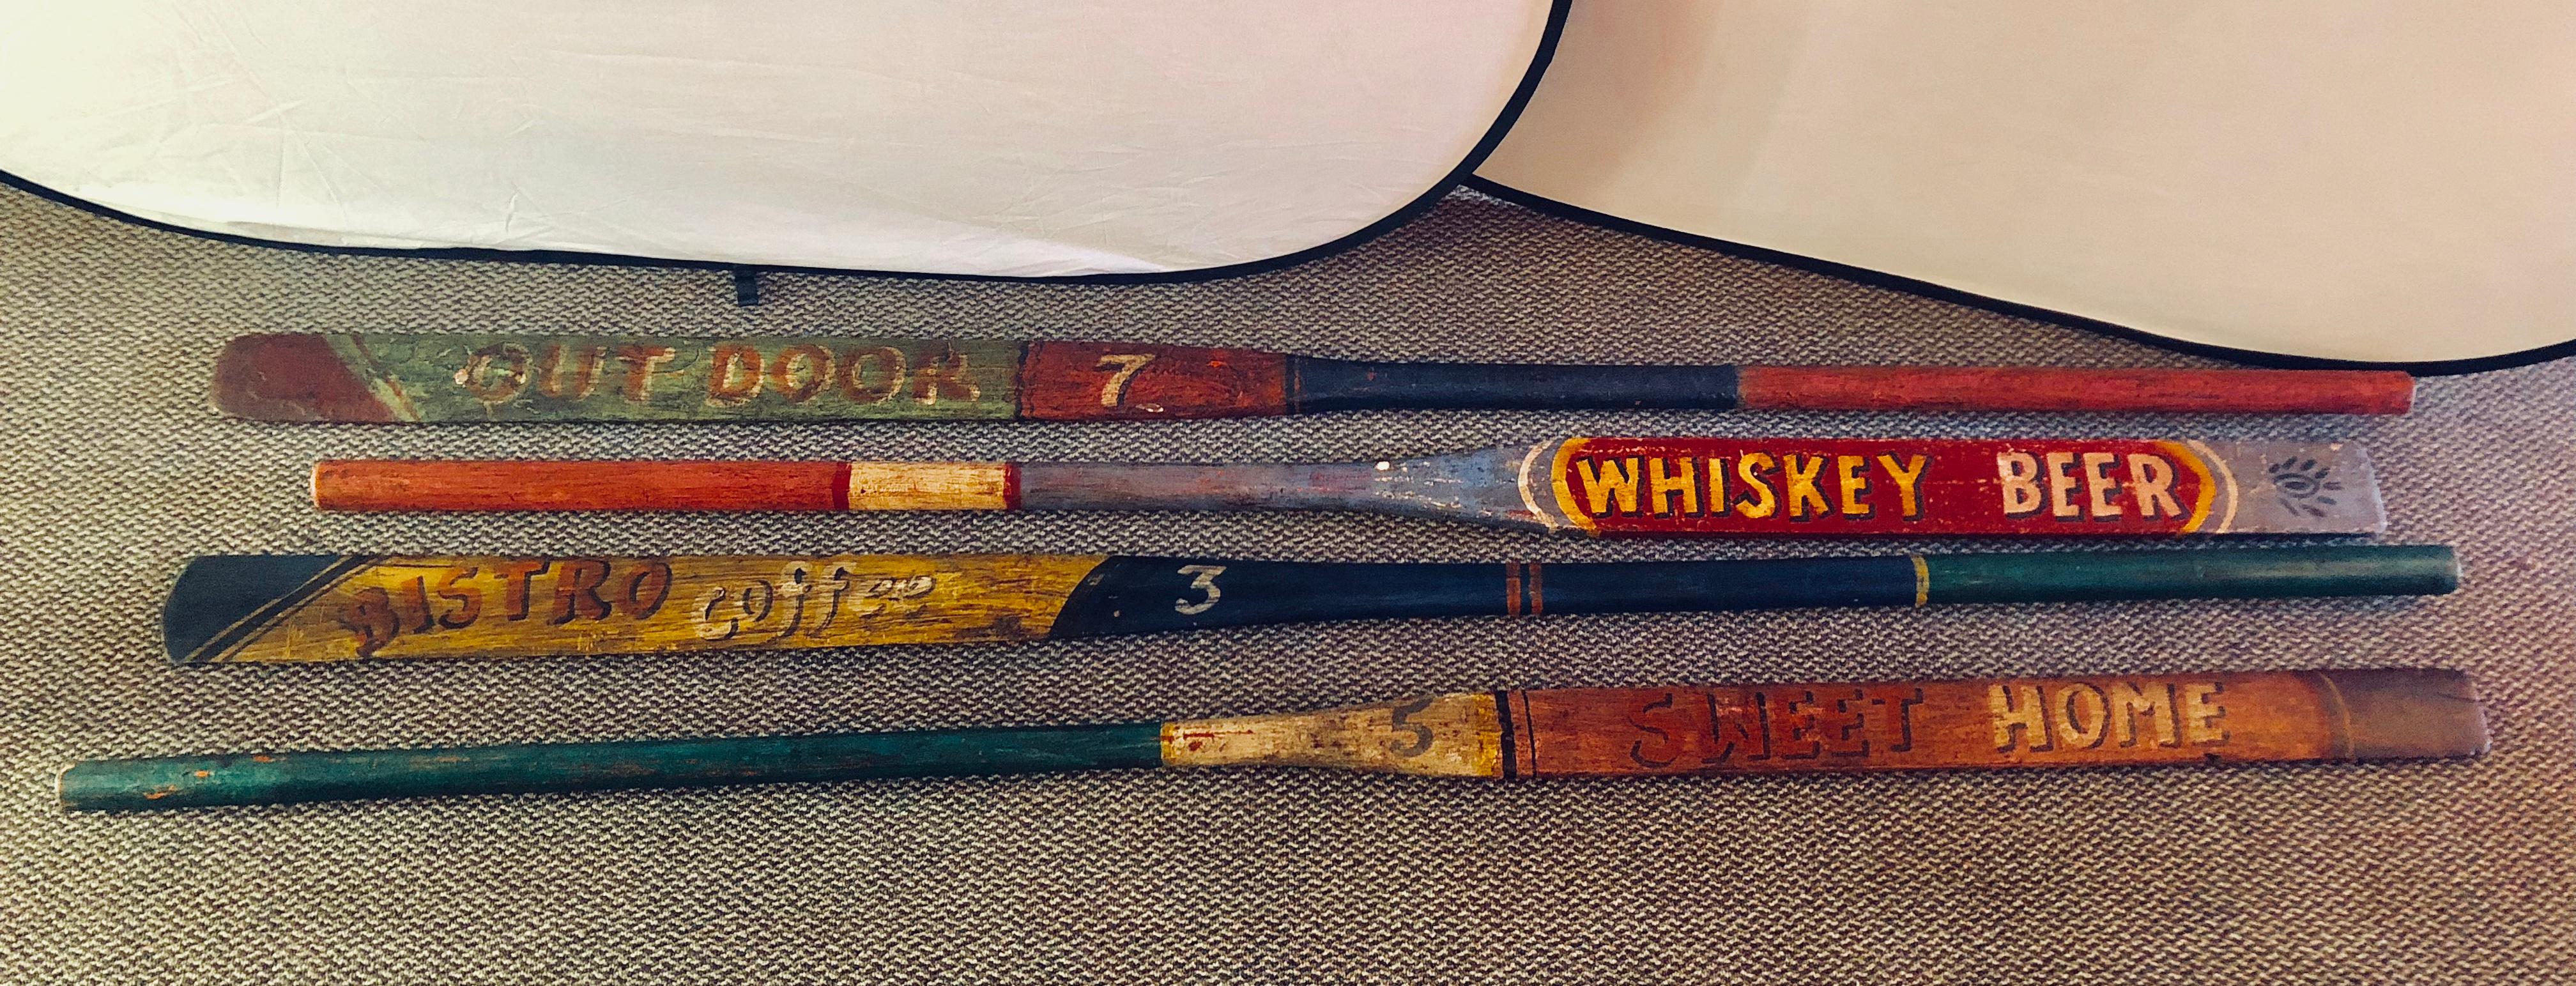 Set of 8 hand-painted inspirational rowing oars or paddles. Priced individually. Each in a rustic painted design having inspirational writings.